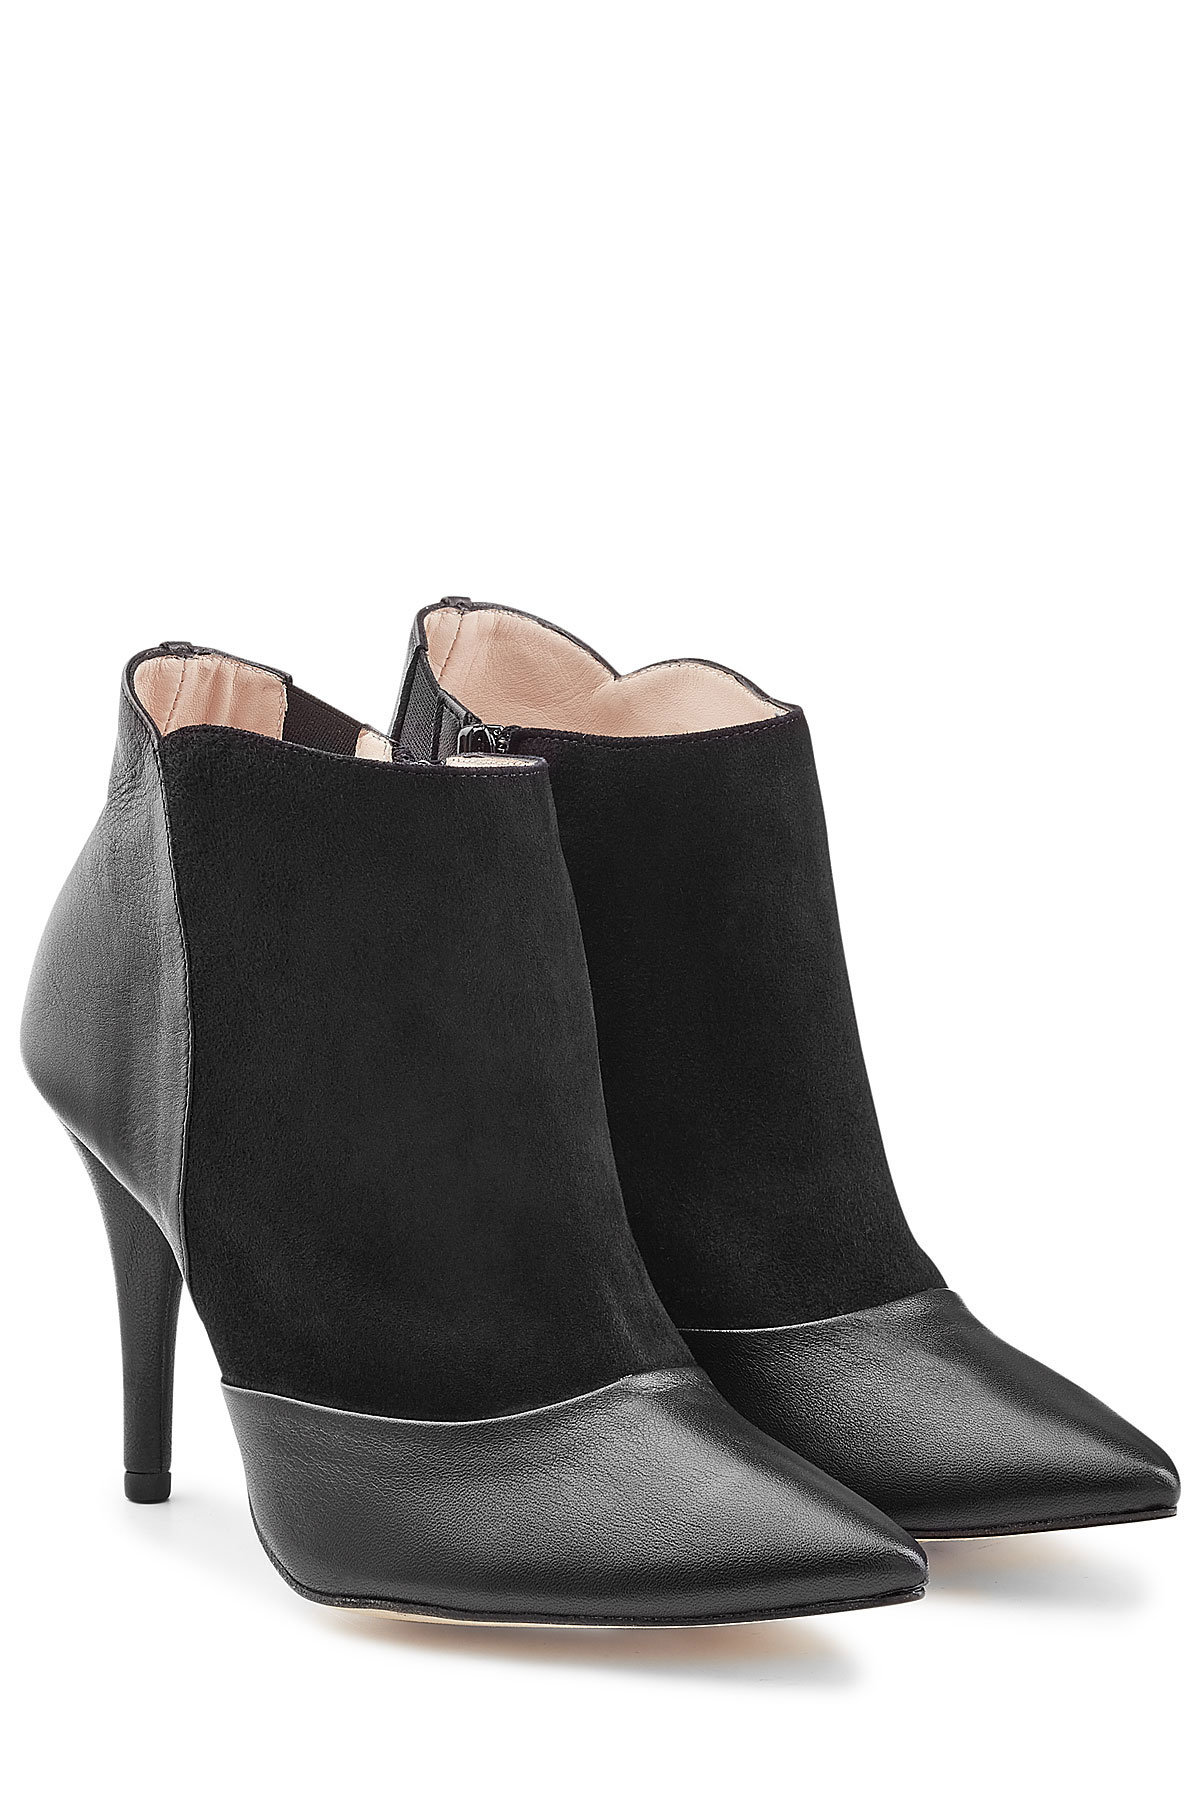 Repetto - Leather and Suede Ankle Boots